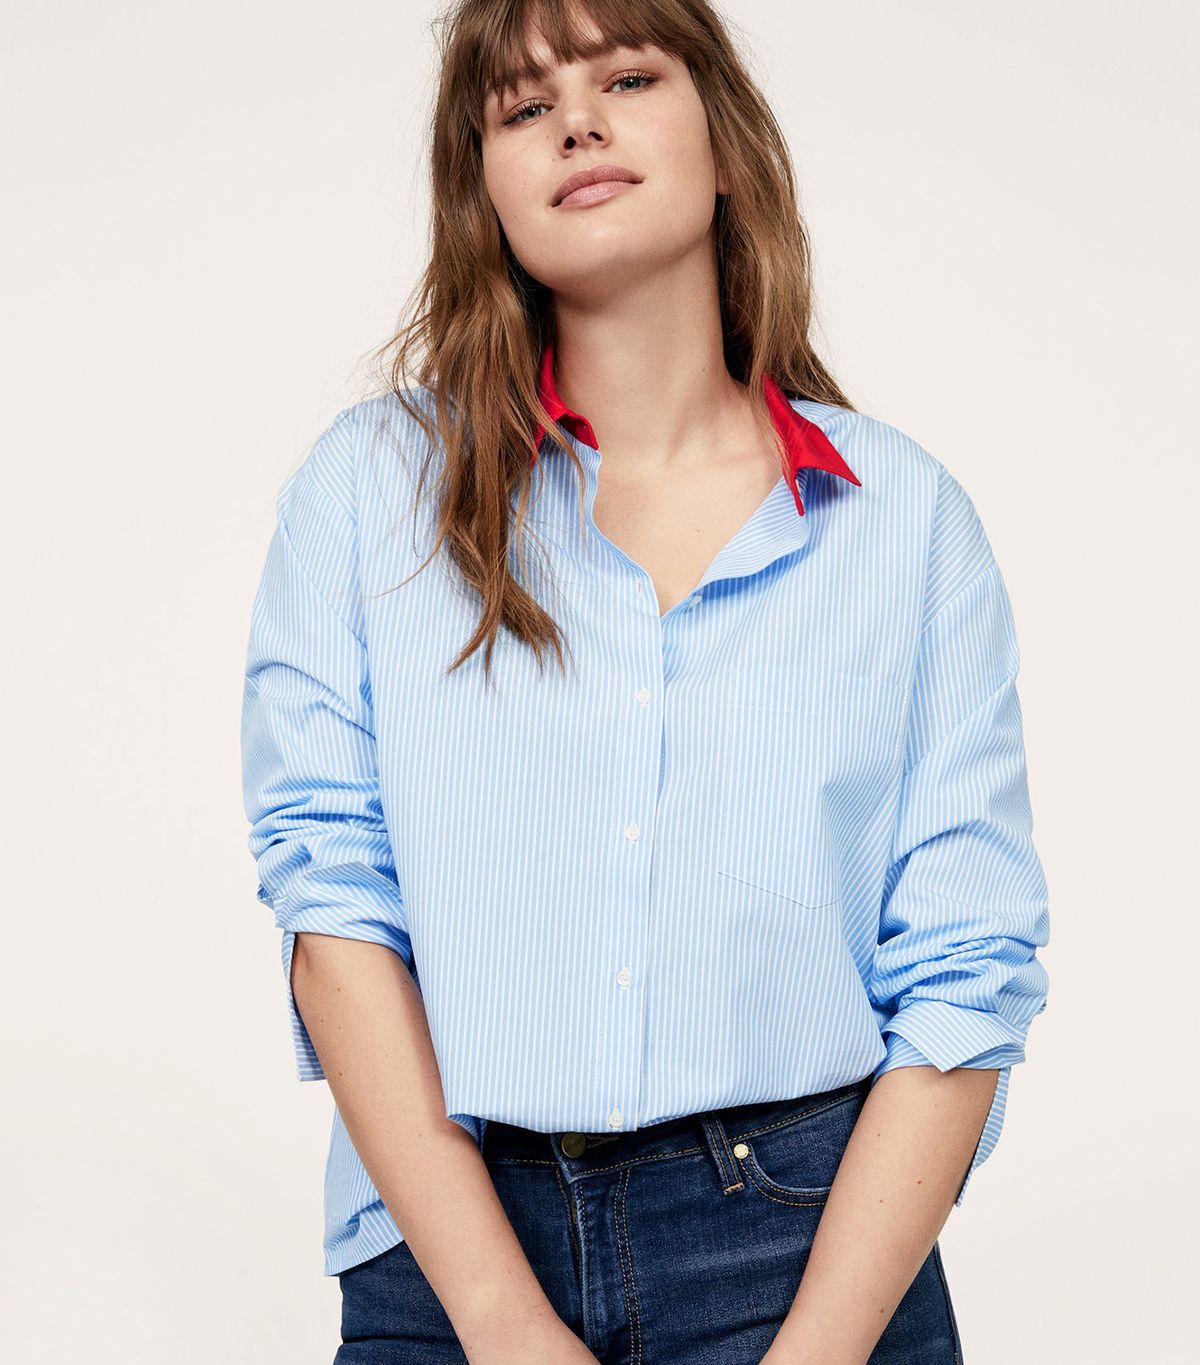 J.Crew Tells Us Its Secret Trick for Cuffed Sleeves | Who What Wear